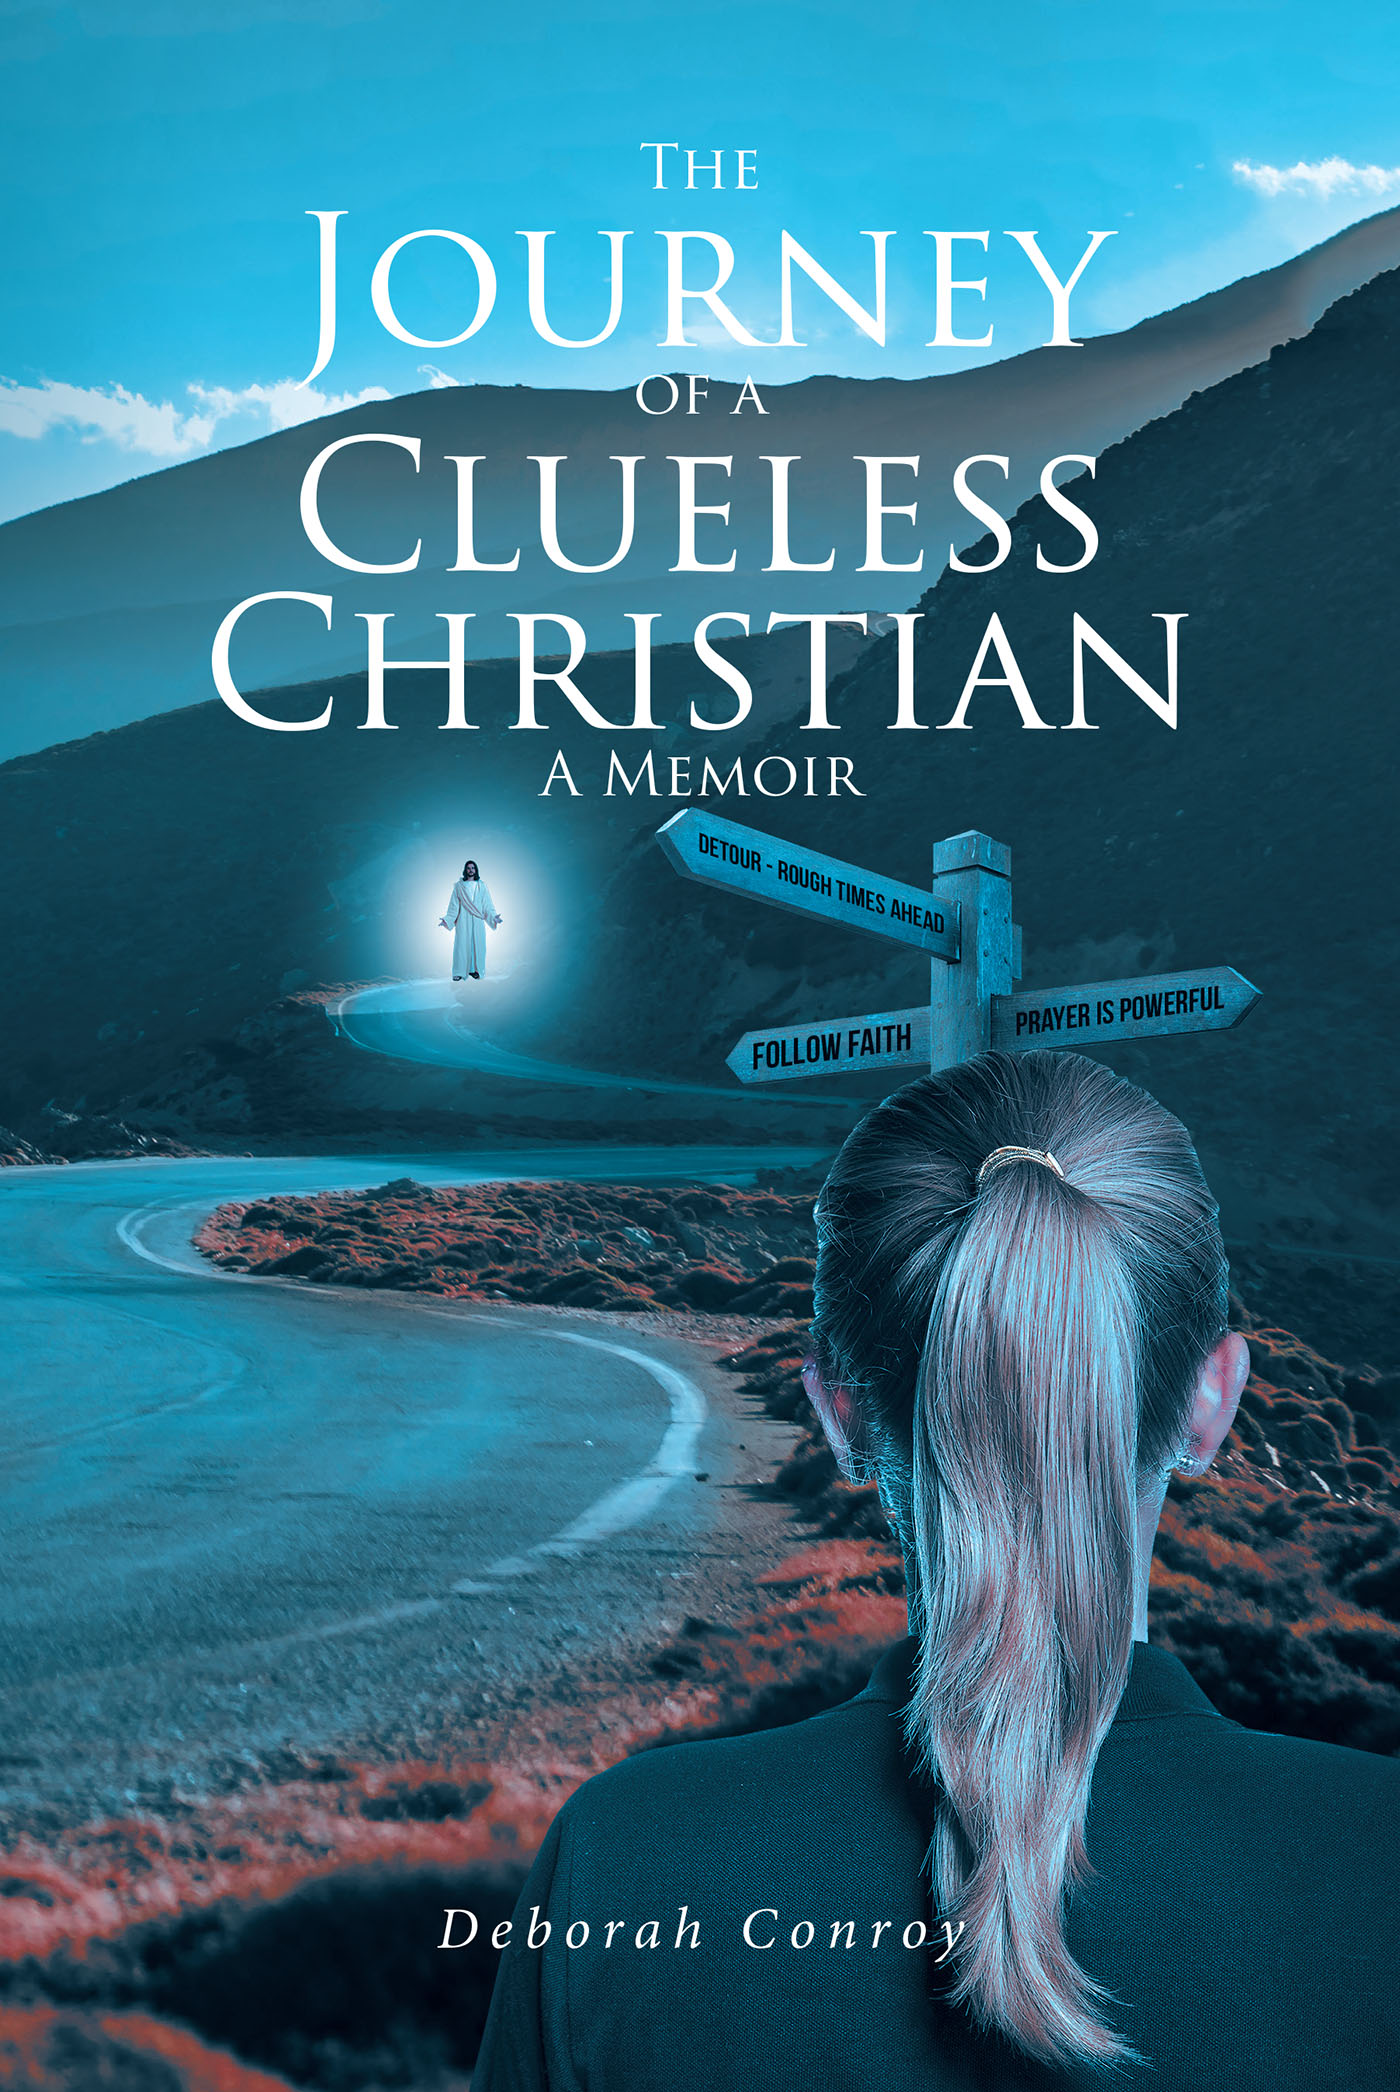 Deborah Conroy’s Newly Released "The Journey of a Clueless Christian: A Memoir" is an Enjoyable Memoir with Heart That Examines the Highs and Lows